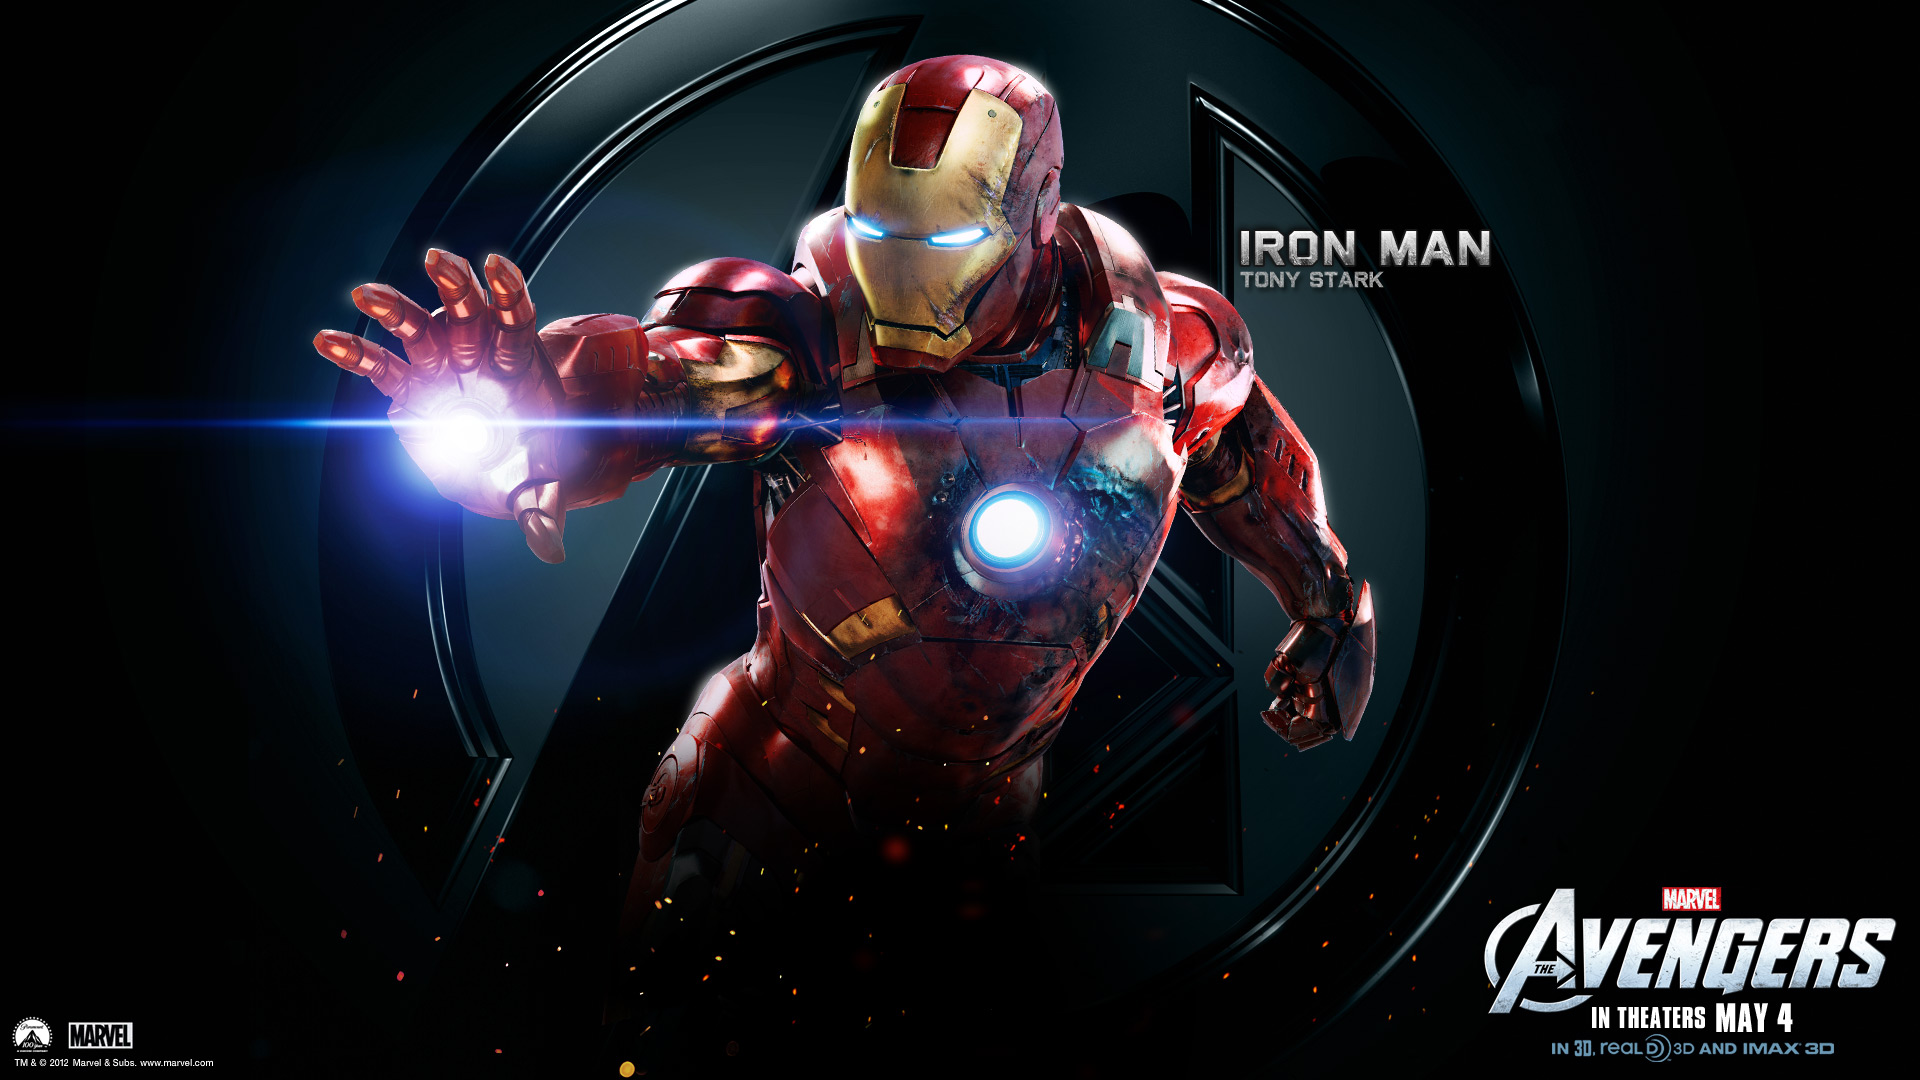 Download image Pin Marvel Hd Wallpaper Ironman Wallpapers Image On PC